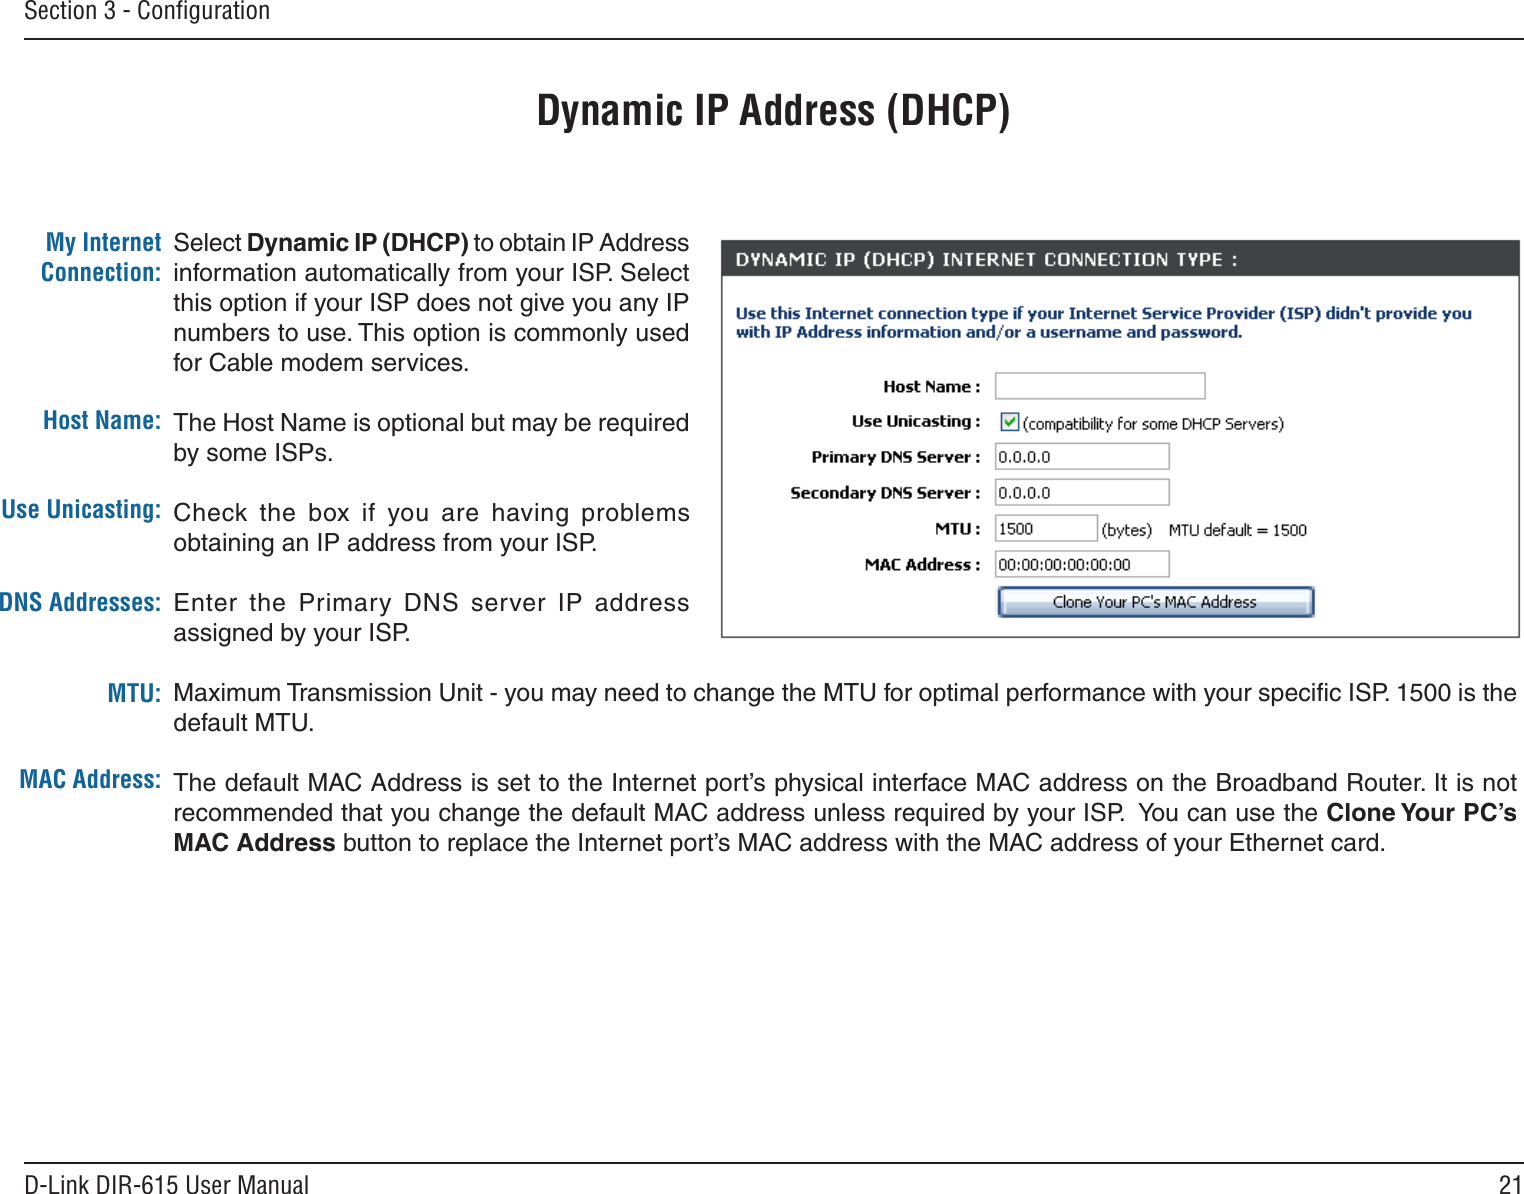 21D-Link DIR-615 User ManualSection 3 - ConﬁgurationDynamic IP Address (DHCP)Select Dynamic IP (DHCP) to obtain IP Address information automatically from your ISP. Select this option if your ISP does not give you any IP numbers to use. This option is commonly used for Cable modem services.The Host Name is optional but may be required by some ISPs. Check the  box  if  you  are  having  problems obtaining an IP address from your ISP.Enter  the  Primary  DNS  server  IP  address assigned by your ISP.Maximum Transmission Unit - you may need to change the MTU for optimal performance with your speciﬁc ISP. 1500 is the default MTU.The default MAC Address is set to the Internet port’s physical interface MAC address on the Broadband Router. It is not recommended that you change the default MAC address unless required by your ISP.  You can use the Clone Your PC’s MAC Address button to replace the Internet port’s MAC address with the MAC address of your Ethernet card.My Internet Connection:Host Name:MAC Address:DNS Addresses:MTU:Use Unicasting: